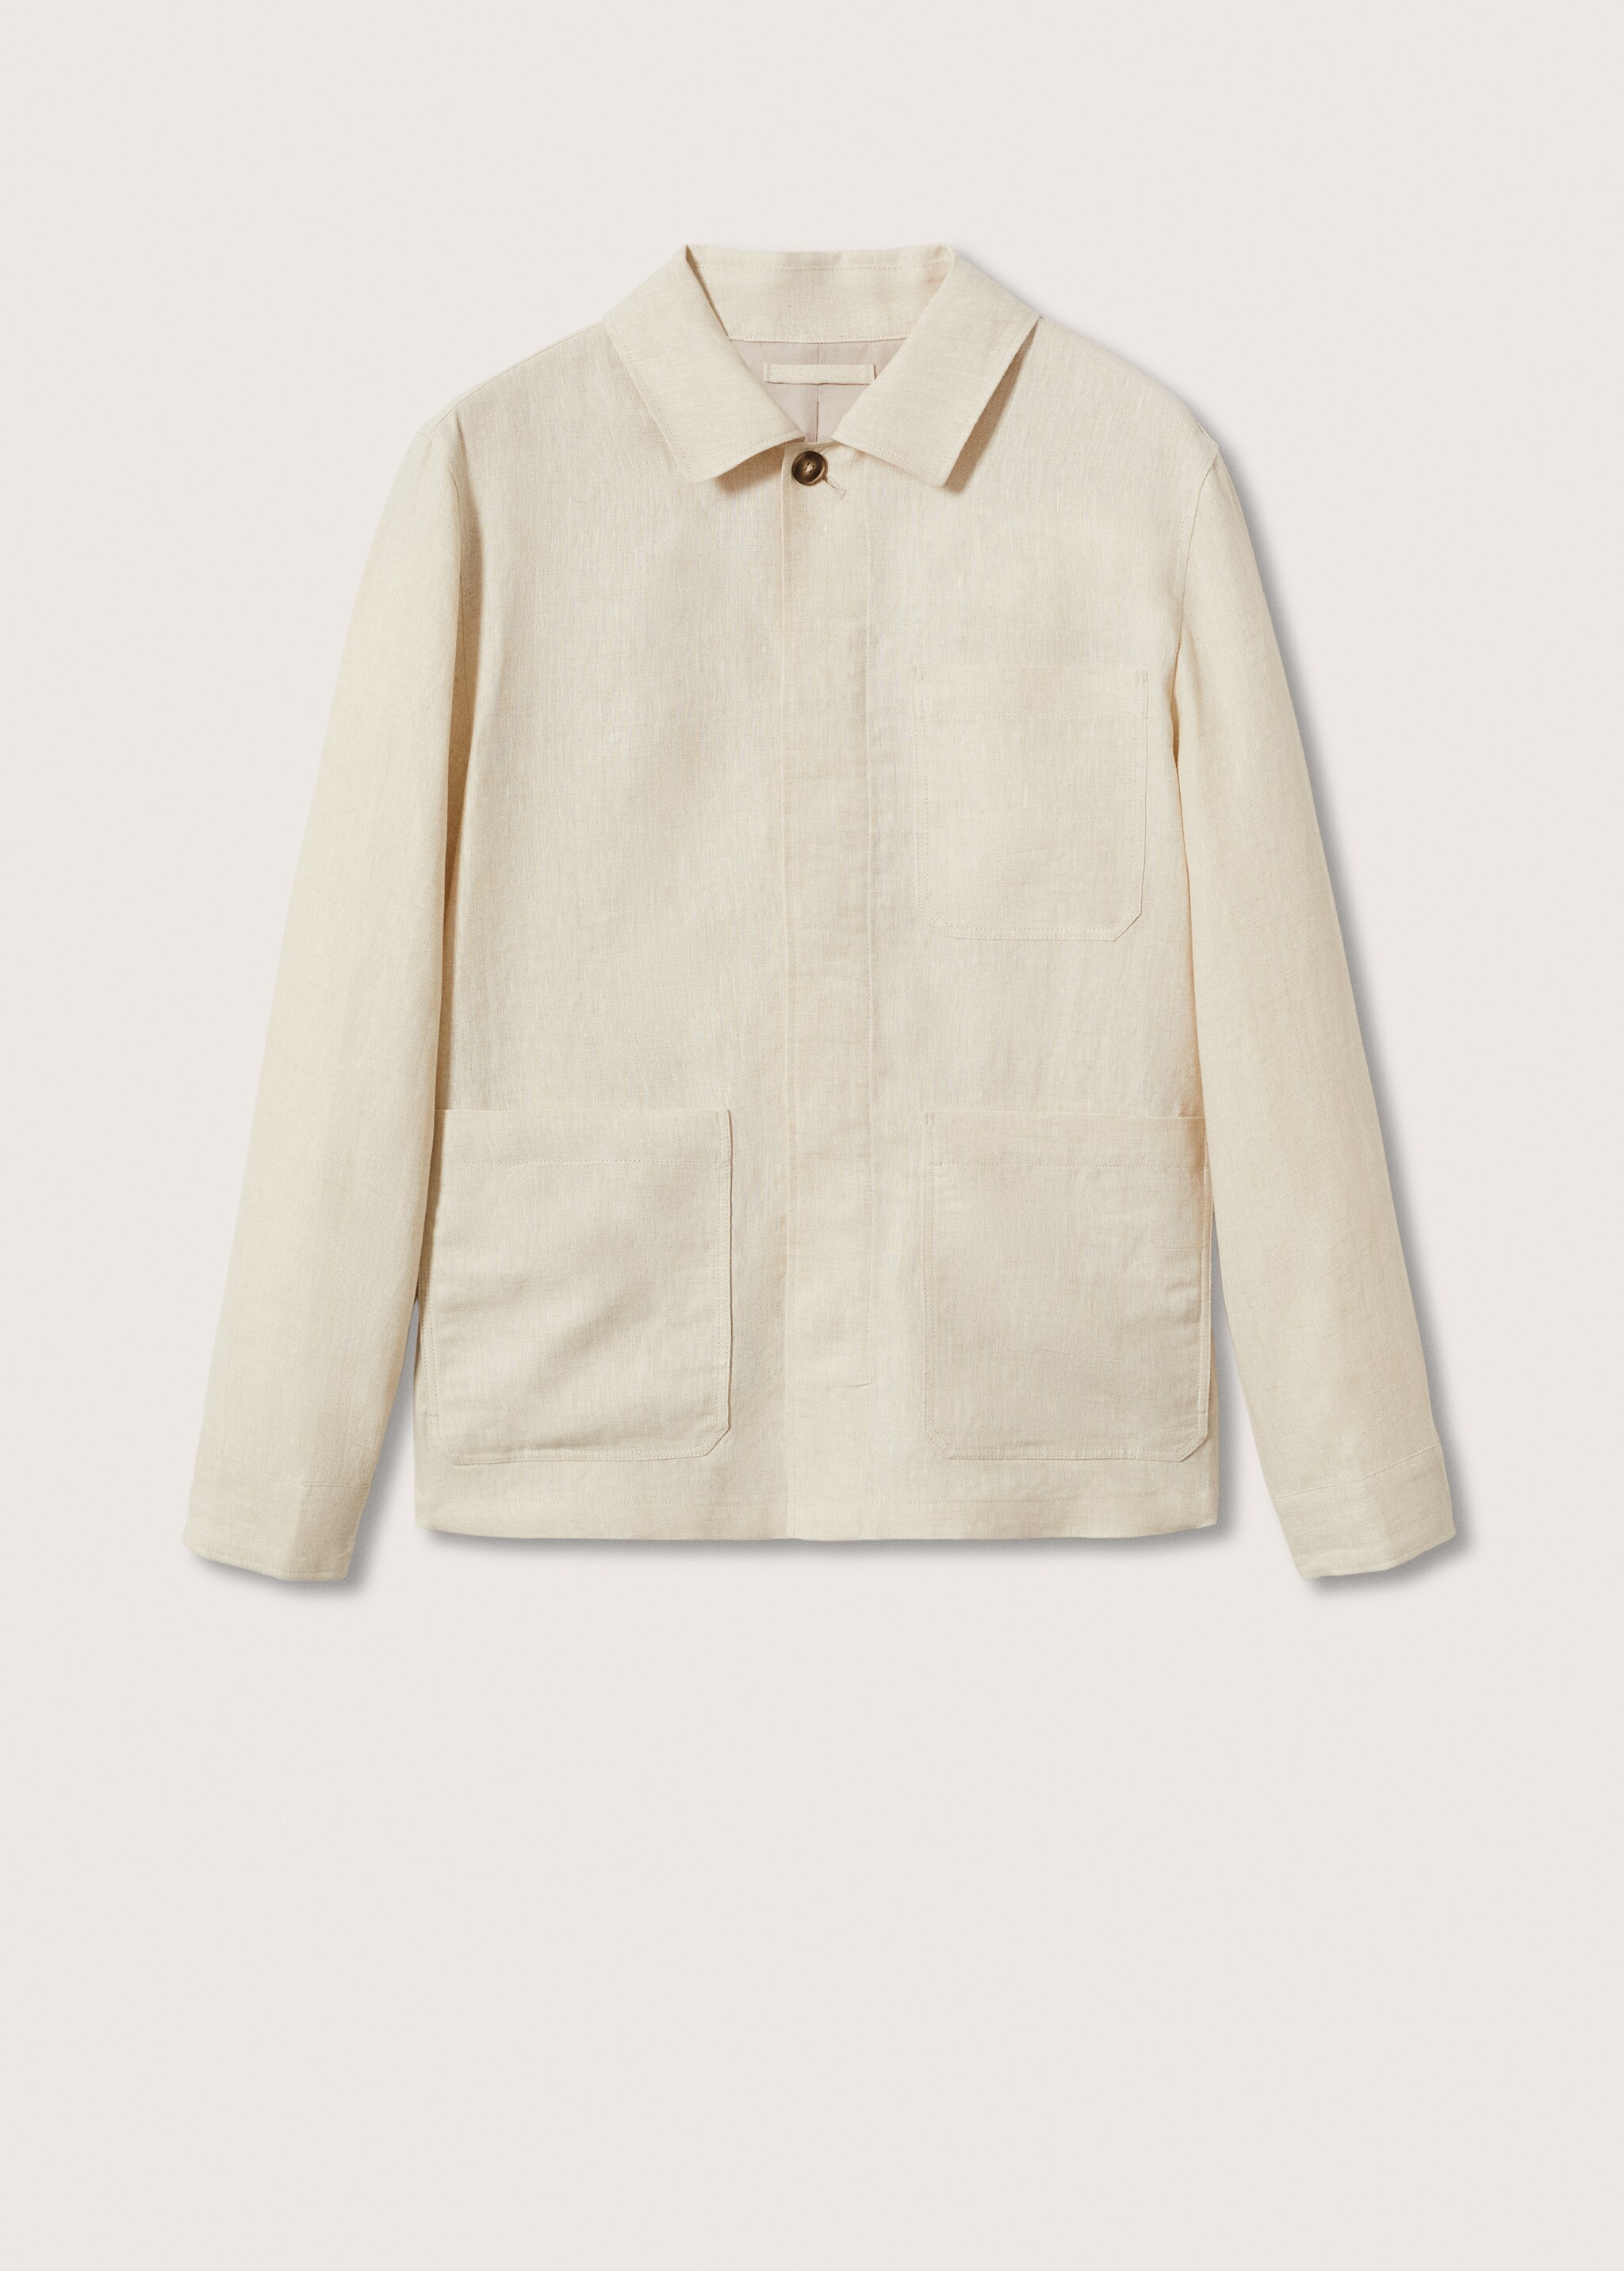 Linen worker jacket - Article without model